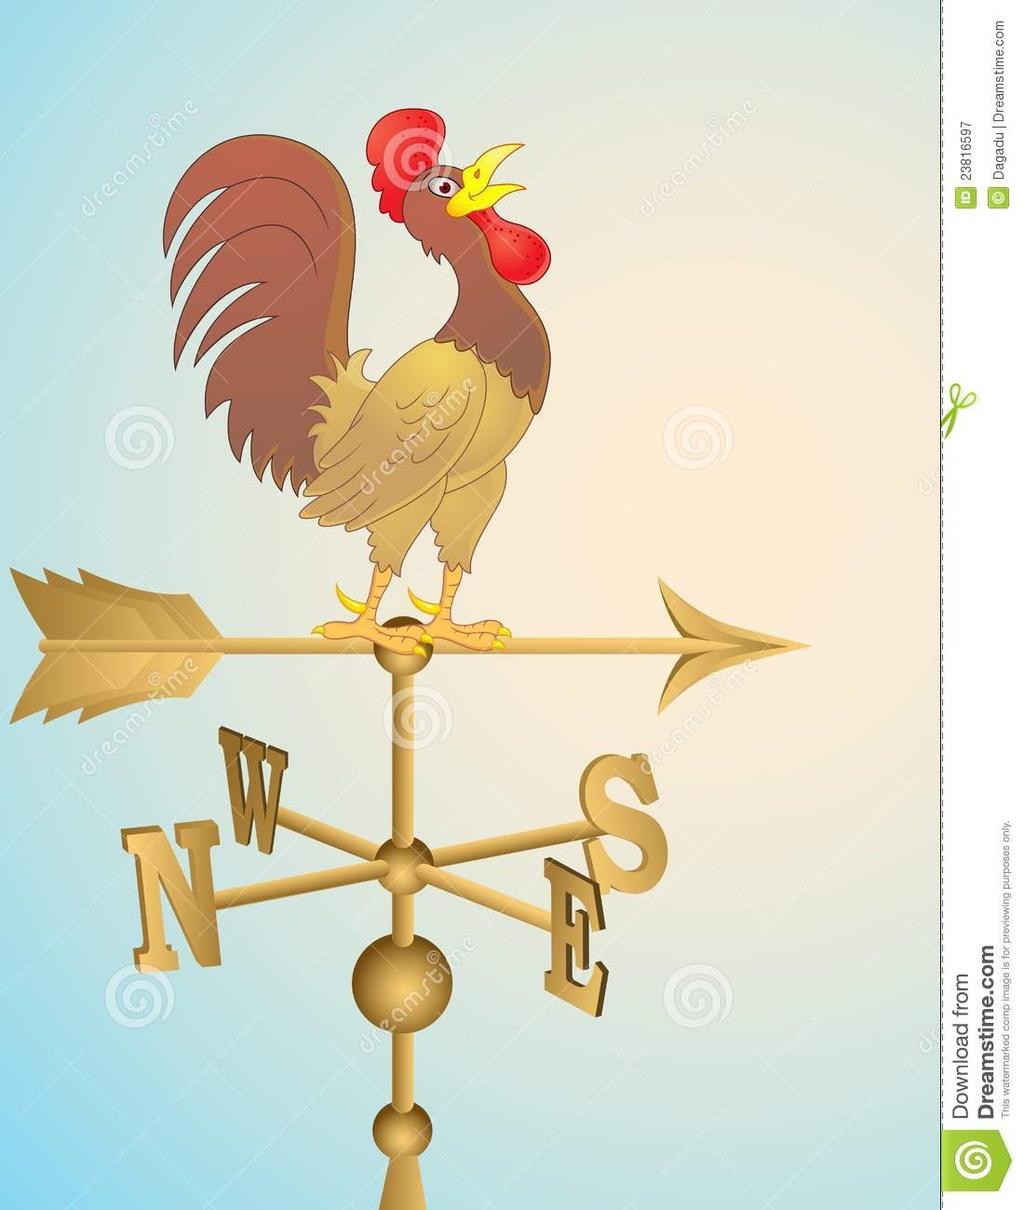 A WIND VANE is an instrument that determines the